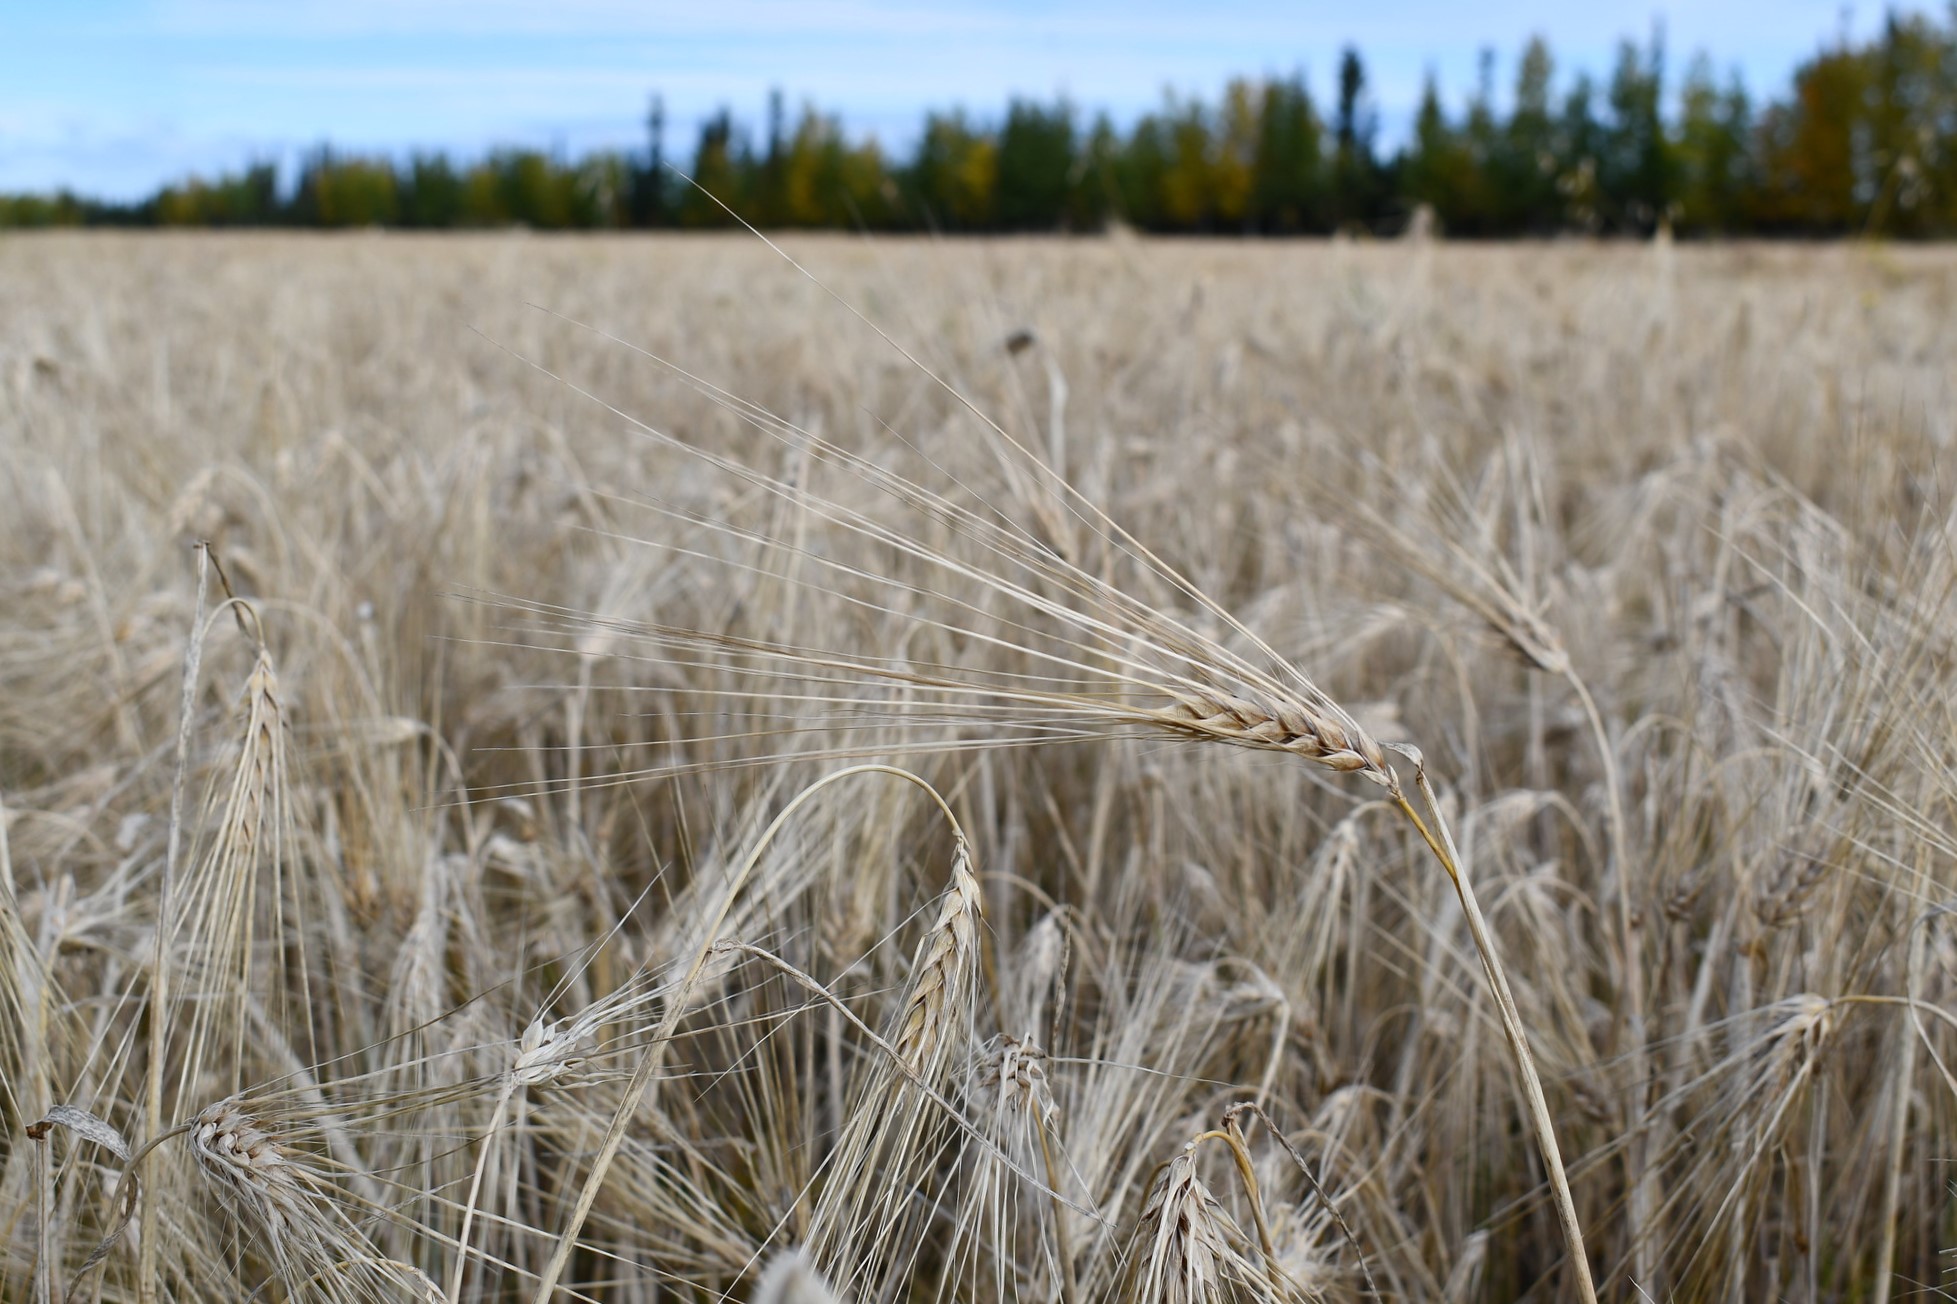 Barley grows in an Alaskan field with conifers in the background.